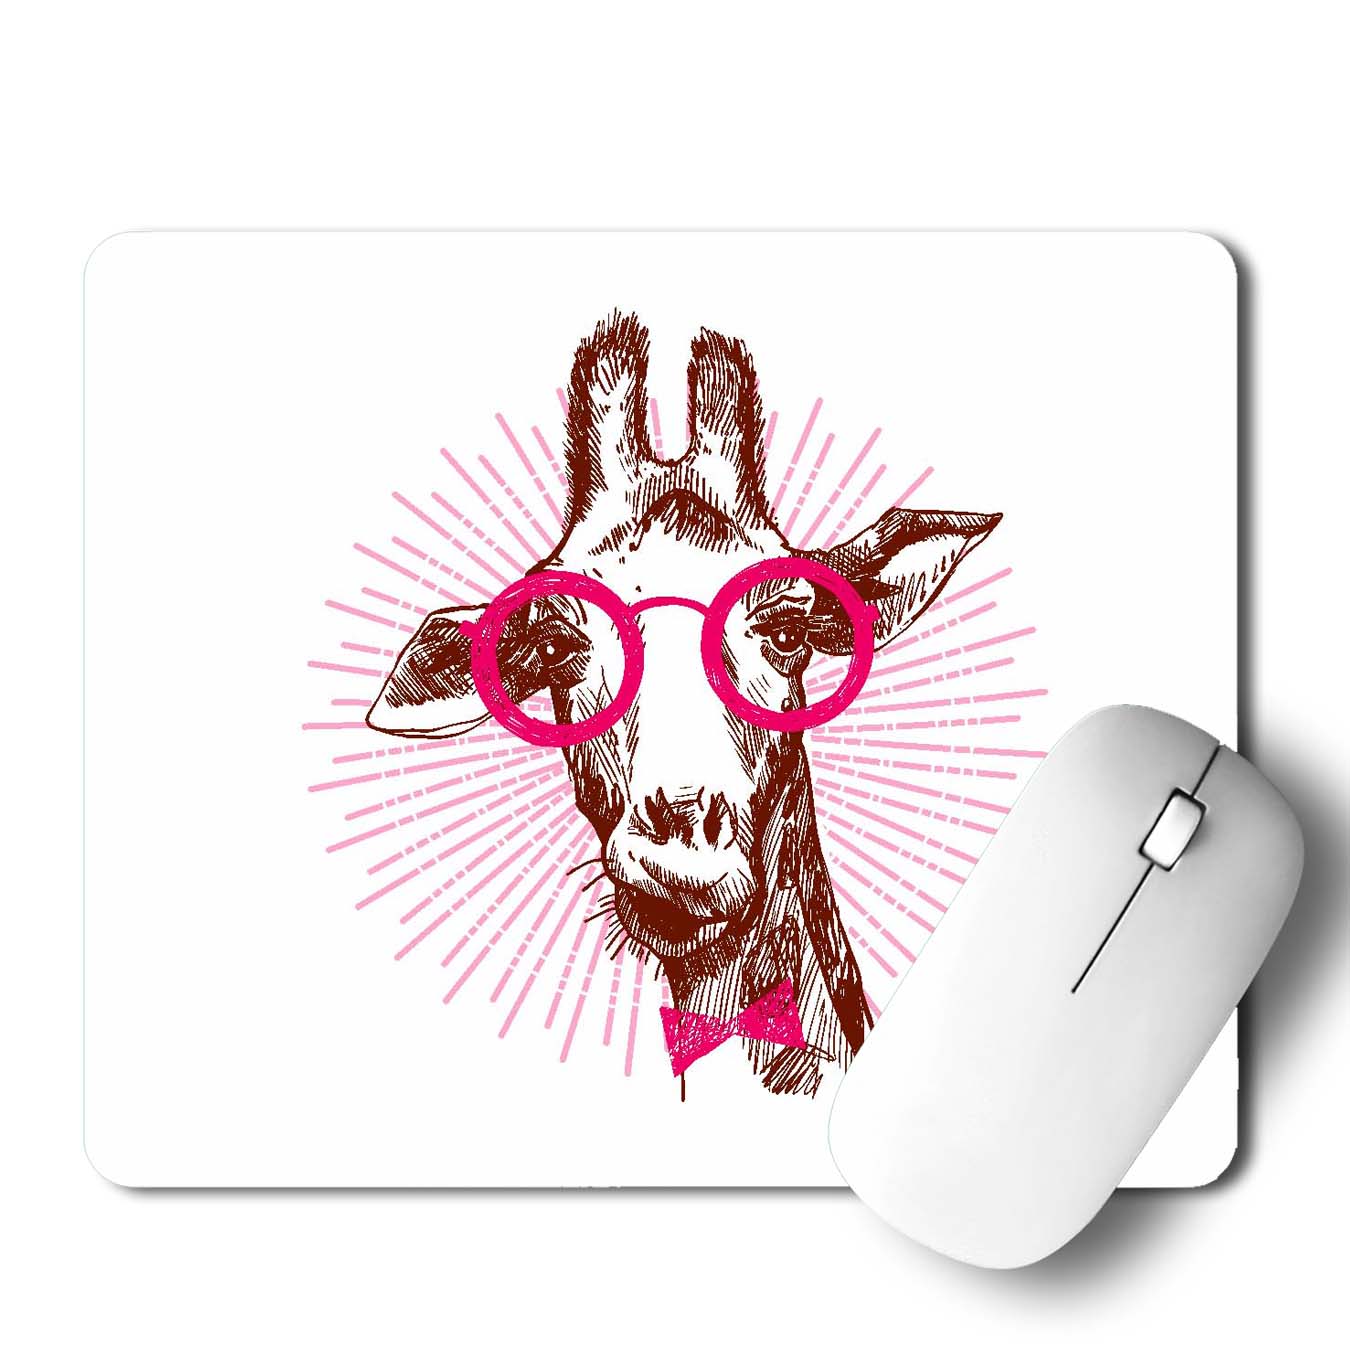 Hipster Giraffe   Mouse Pad